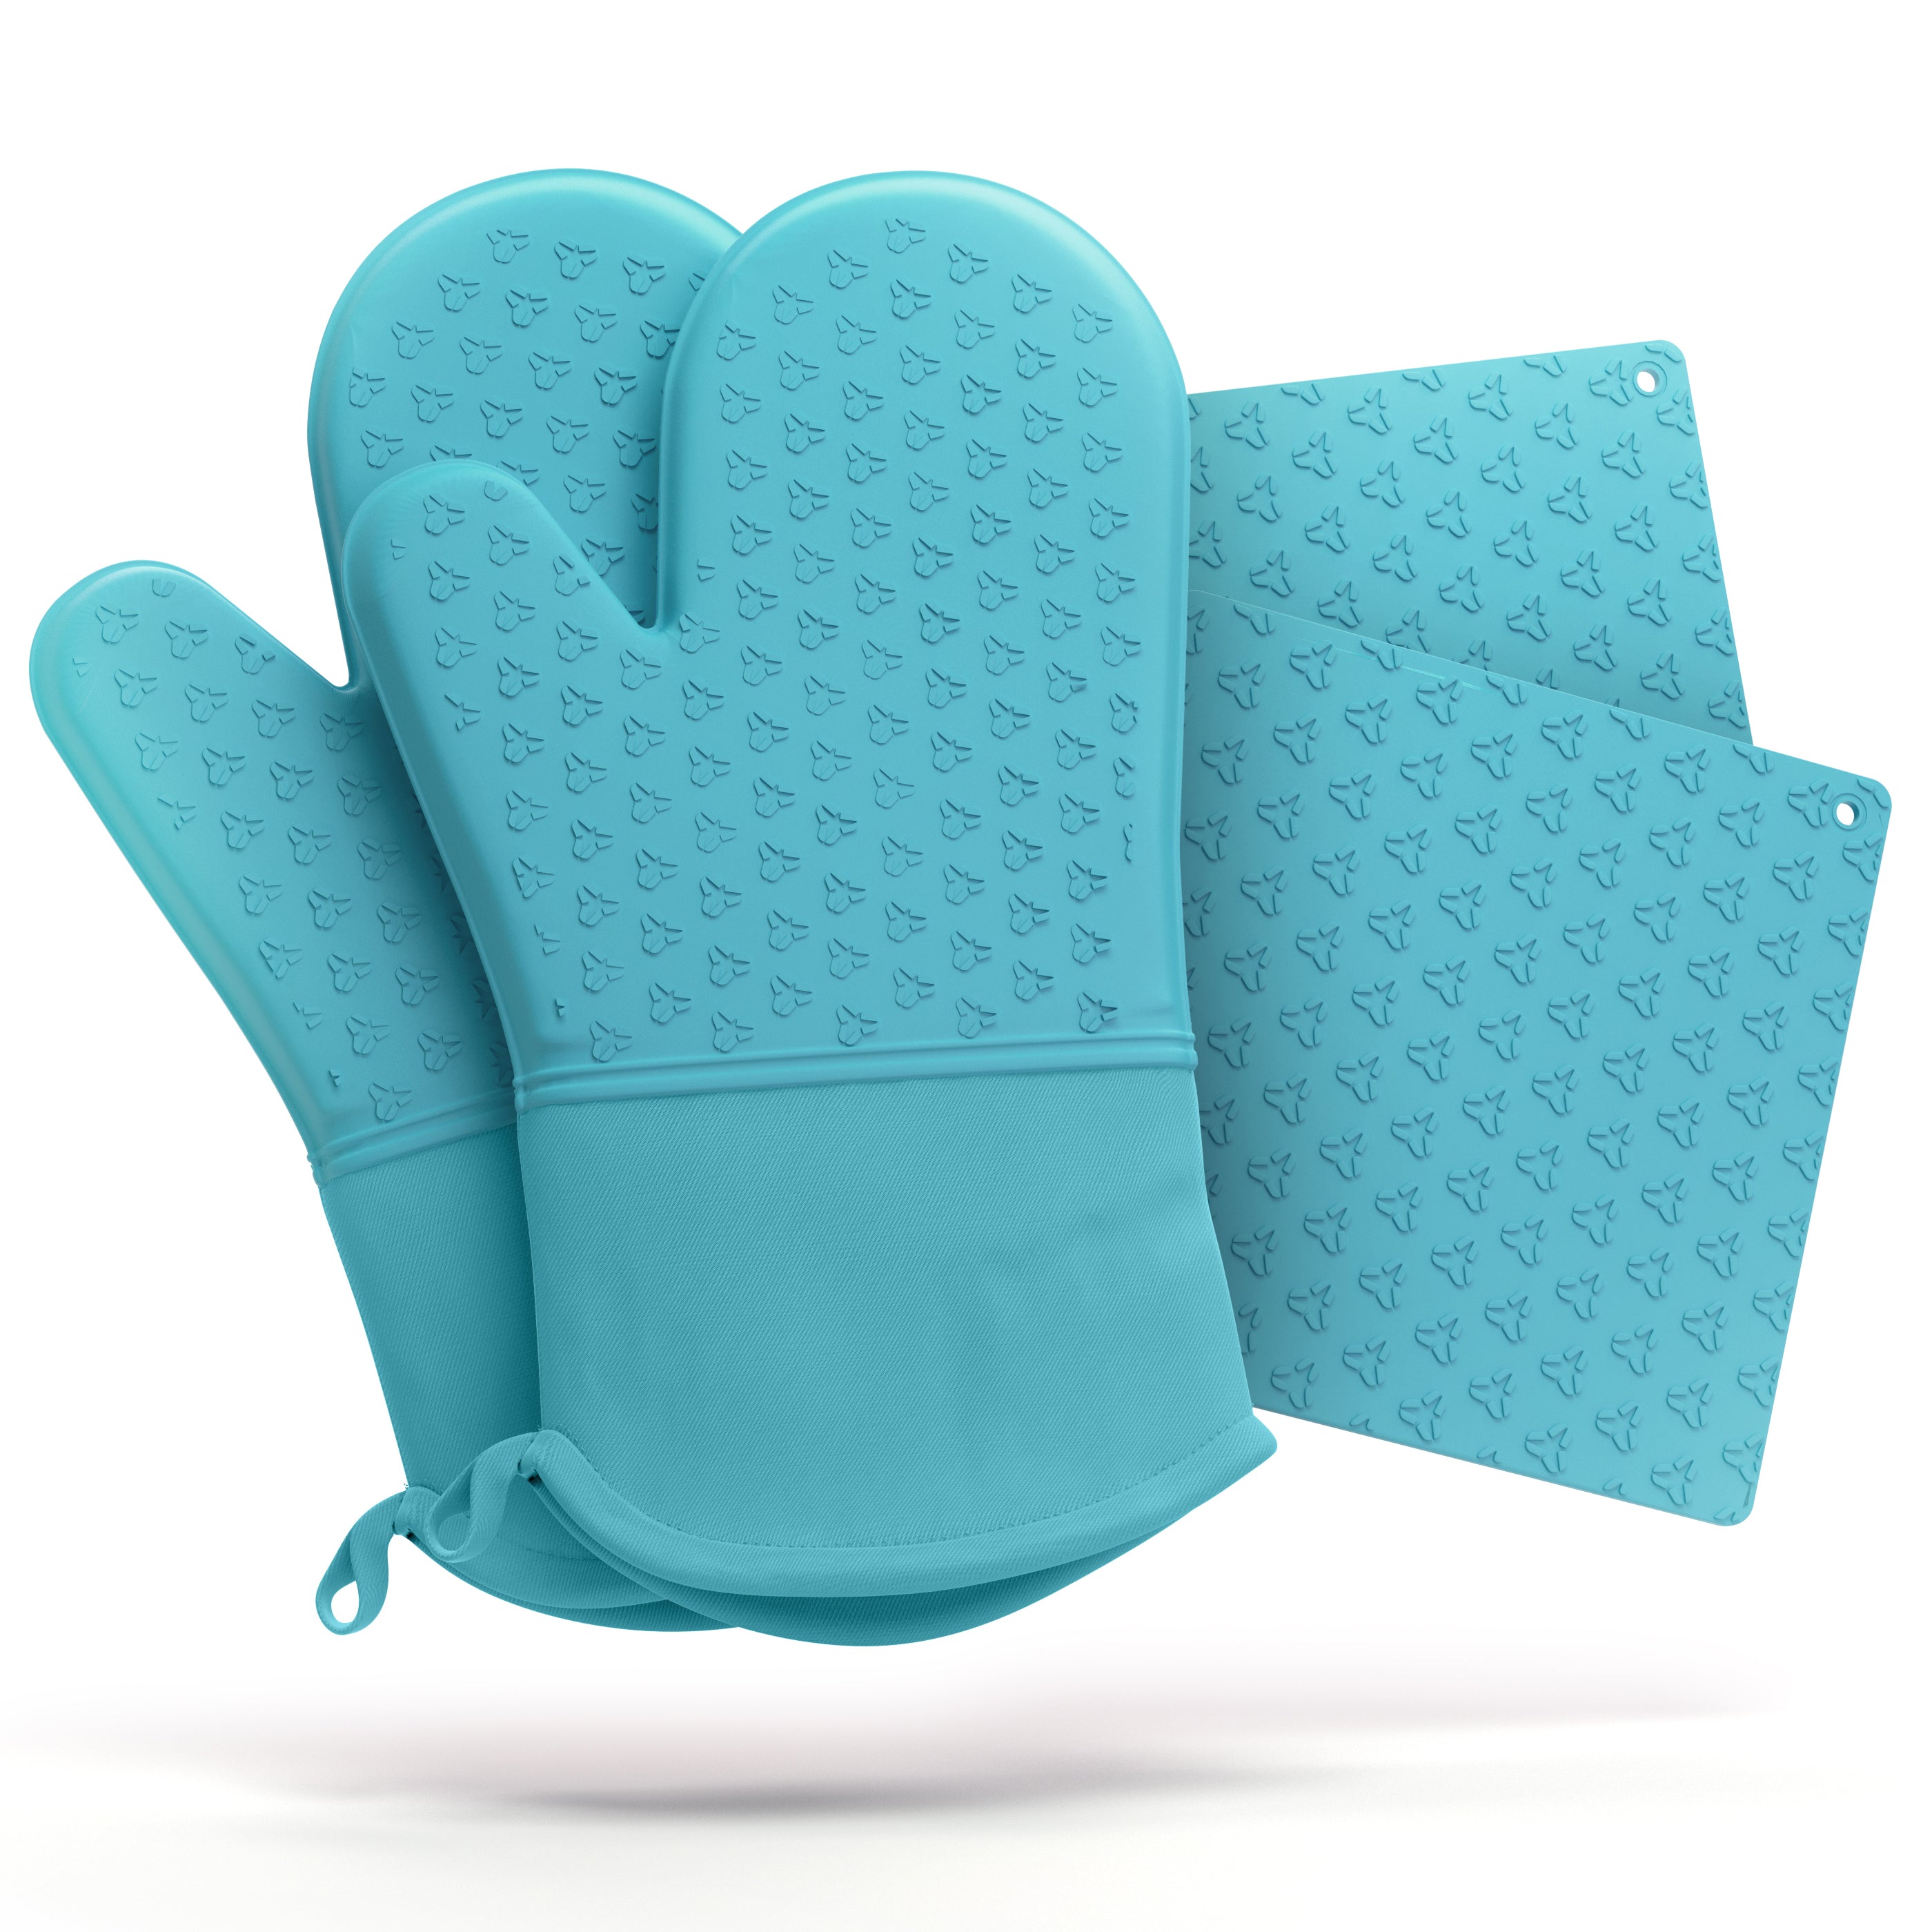 Silicon Oven Mitt: Protect Your Hands in Style